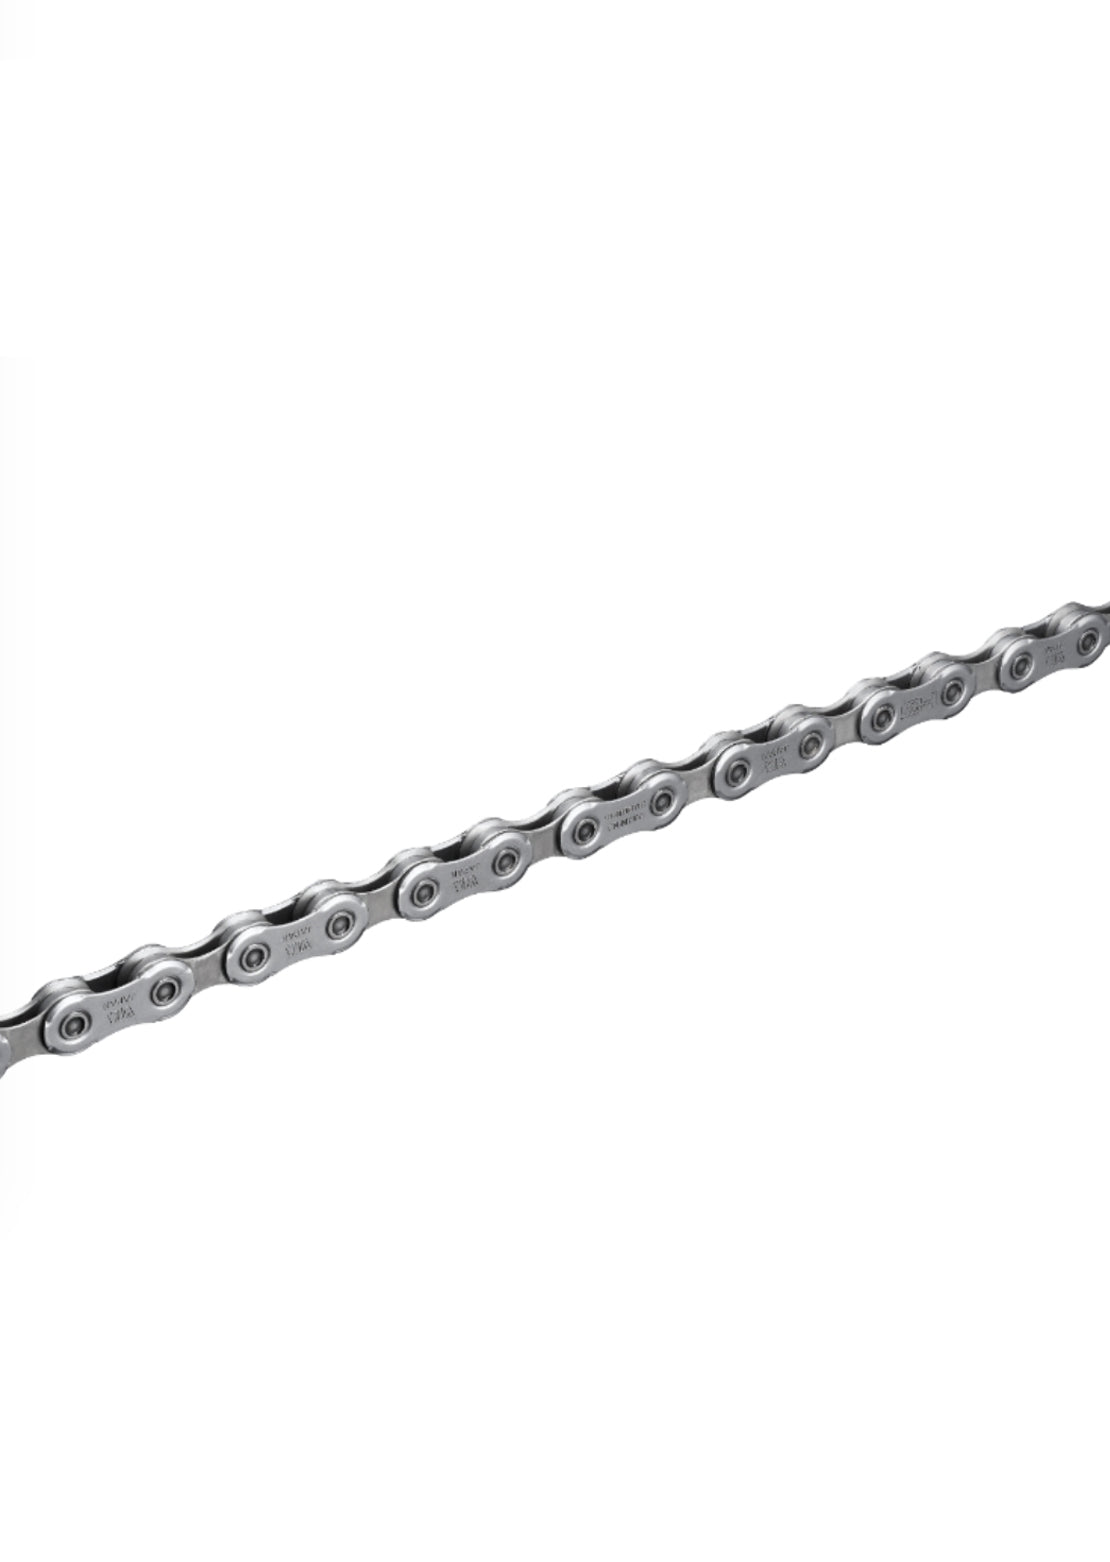 Shimano CN-M7100 12 Speed Bicycle Chain Silver